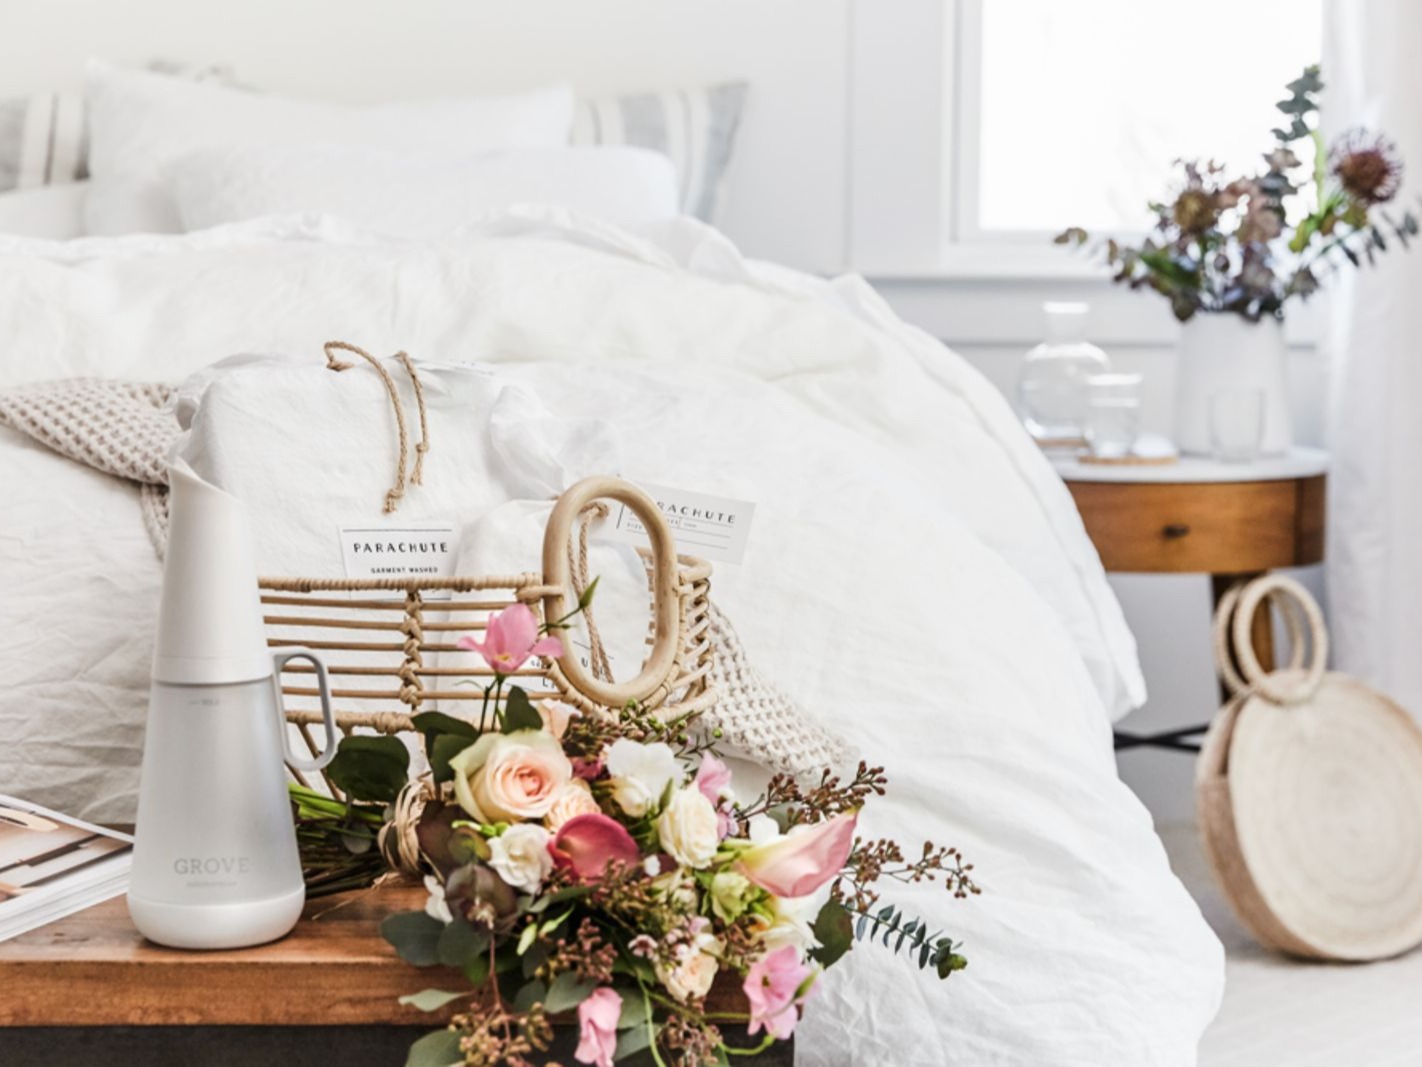 Image of bed with fluffy white comforter and flowers and Grove products on bench at end of bed